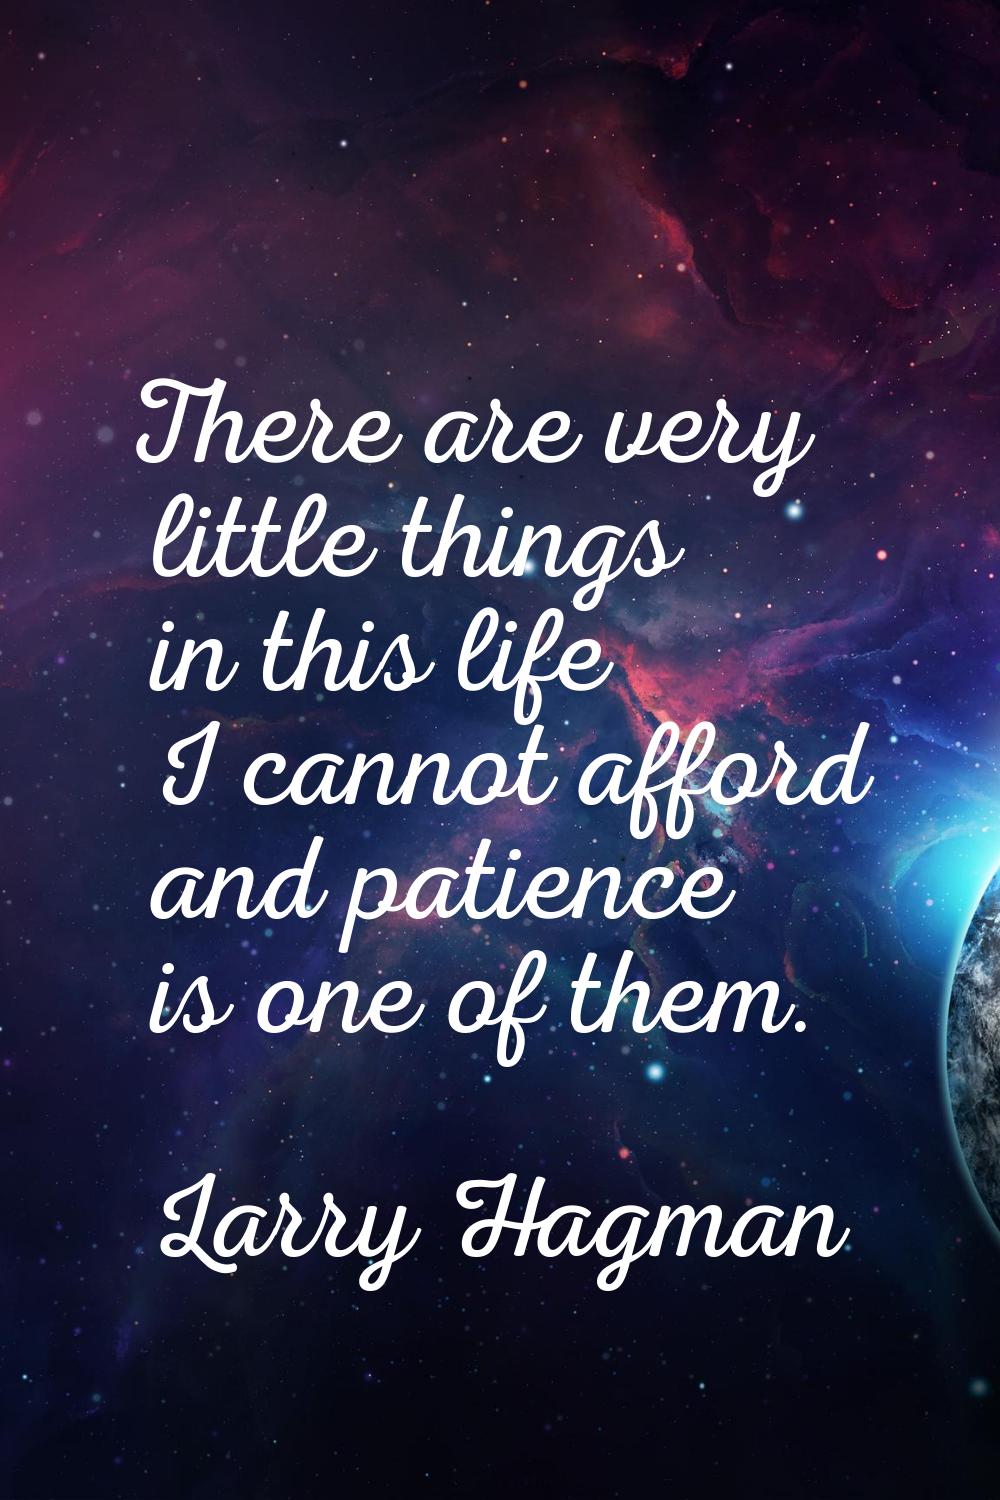 There are very little things in this life I cannot afford and patience is one of them.